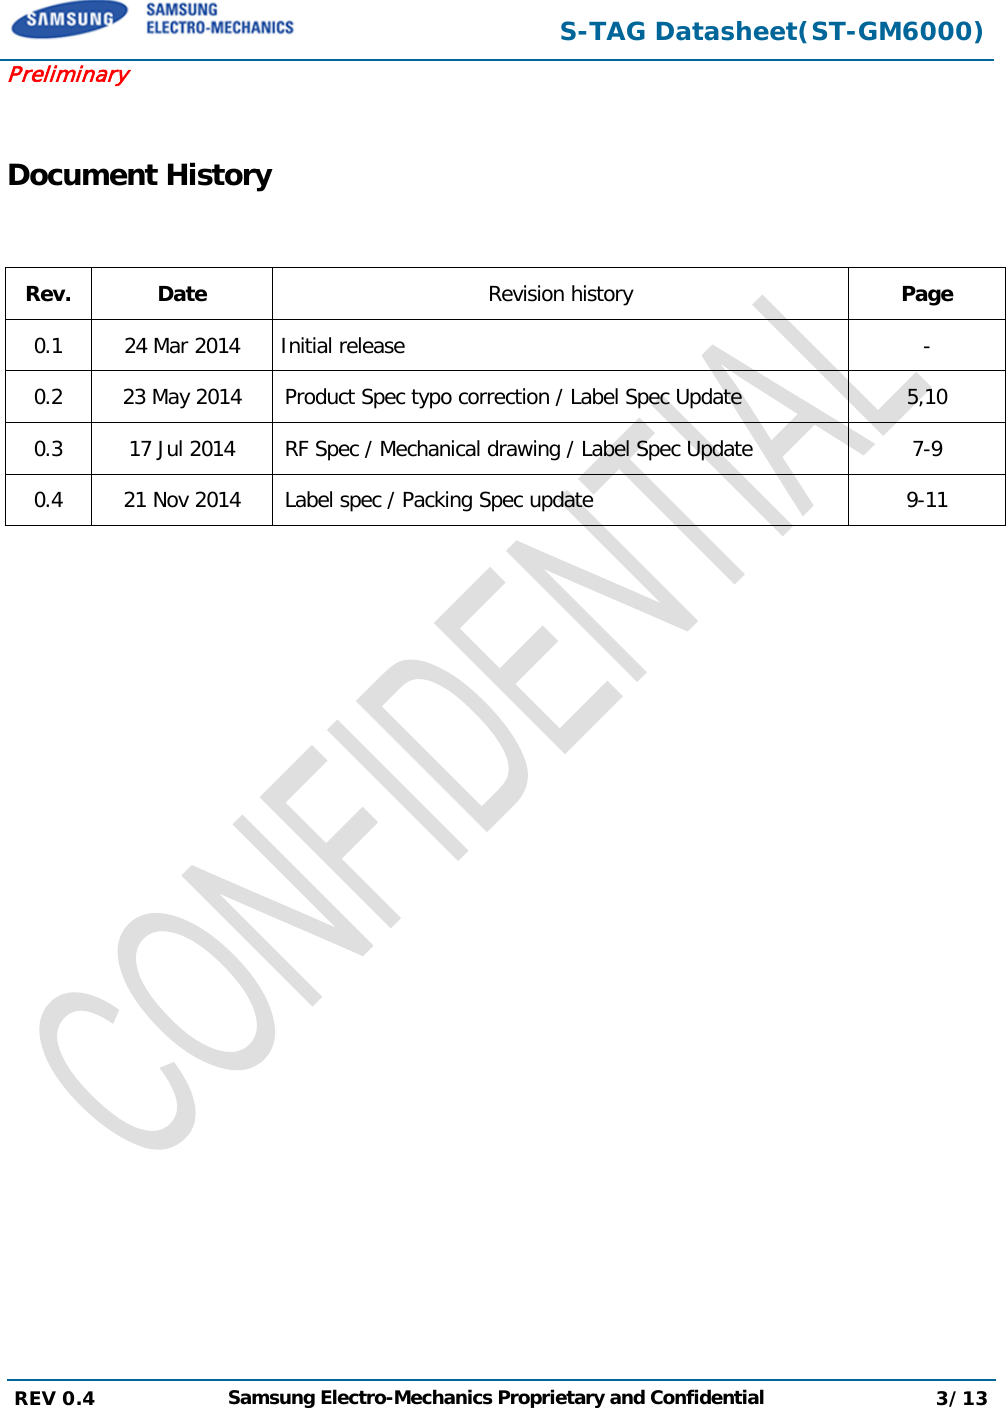  S-TAG Datasheet(ST-GM6000) Preliminary  Document History   Rev. Date Revision history Page 0.1 24 Mar 2014   Initial release   - 0.2 23 May 2014 Product Spec typo correction / Label Spec Update 5,10 0.3 17 Jul 2014 RF Spec / Mechanical drawing / Label Spec Update  7-9 0.4 21 Nov 2014  Label spec / Packing Spec update  9-11  REV 0.4  Samsung Electro-Mechanics Proprietary and Confidential 3/13   